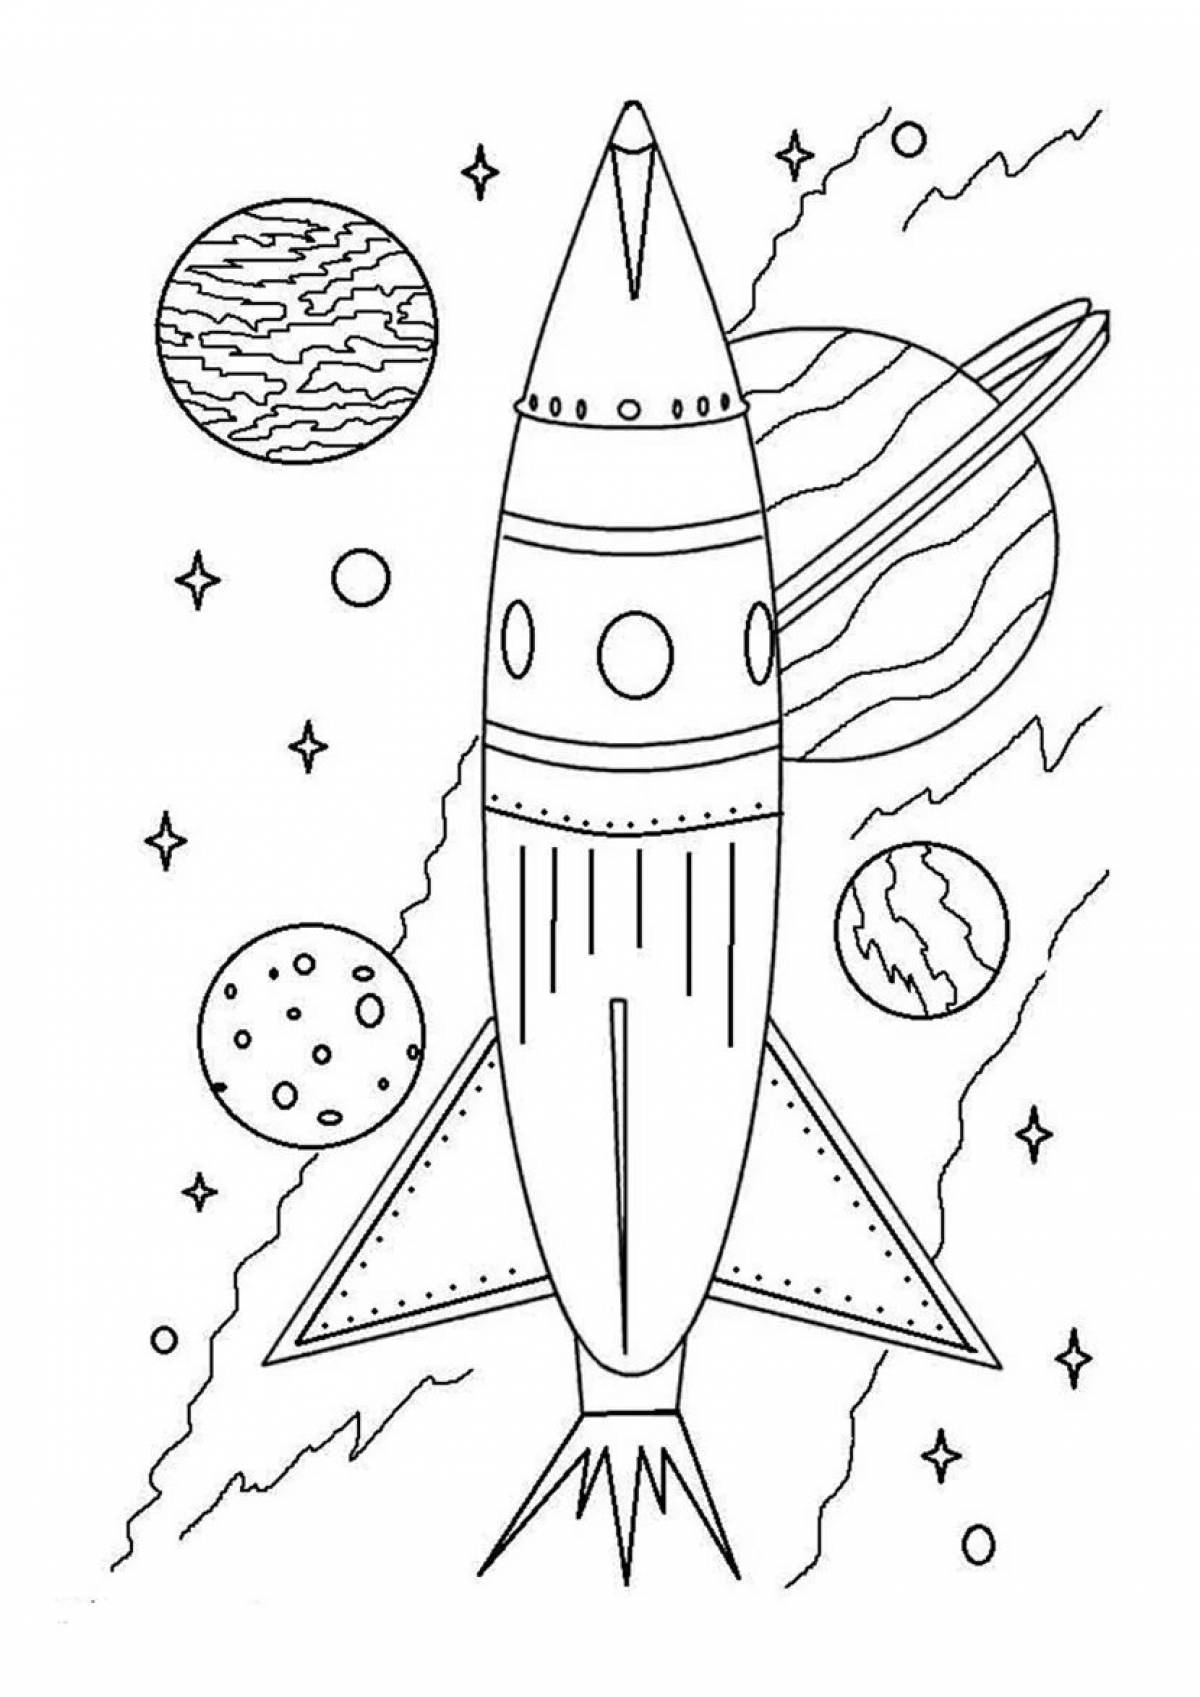 Elegant space 1st class coloring book